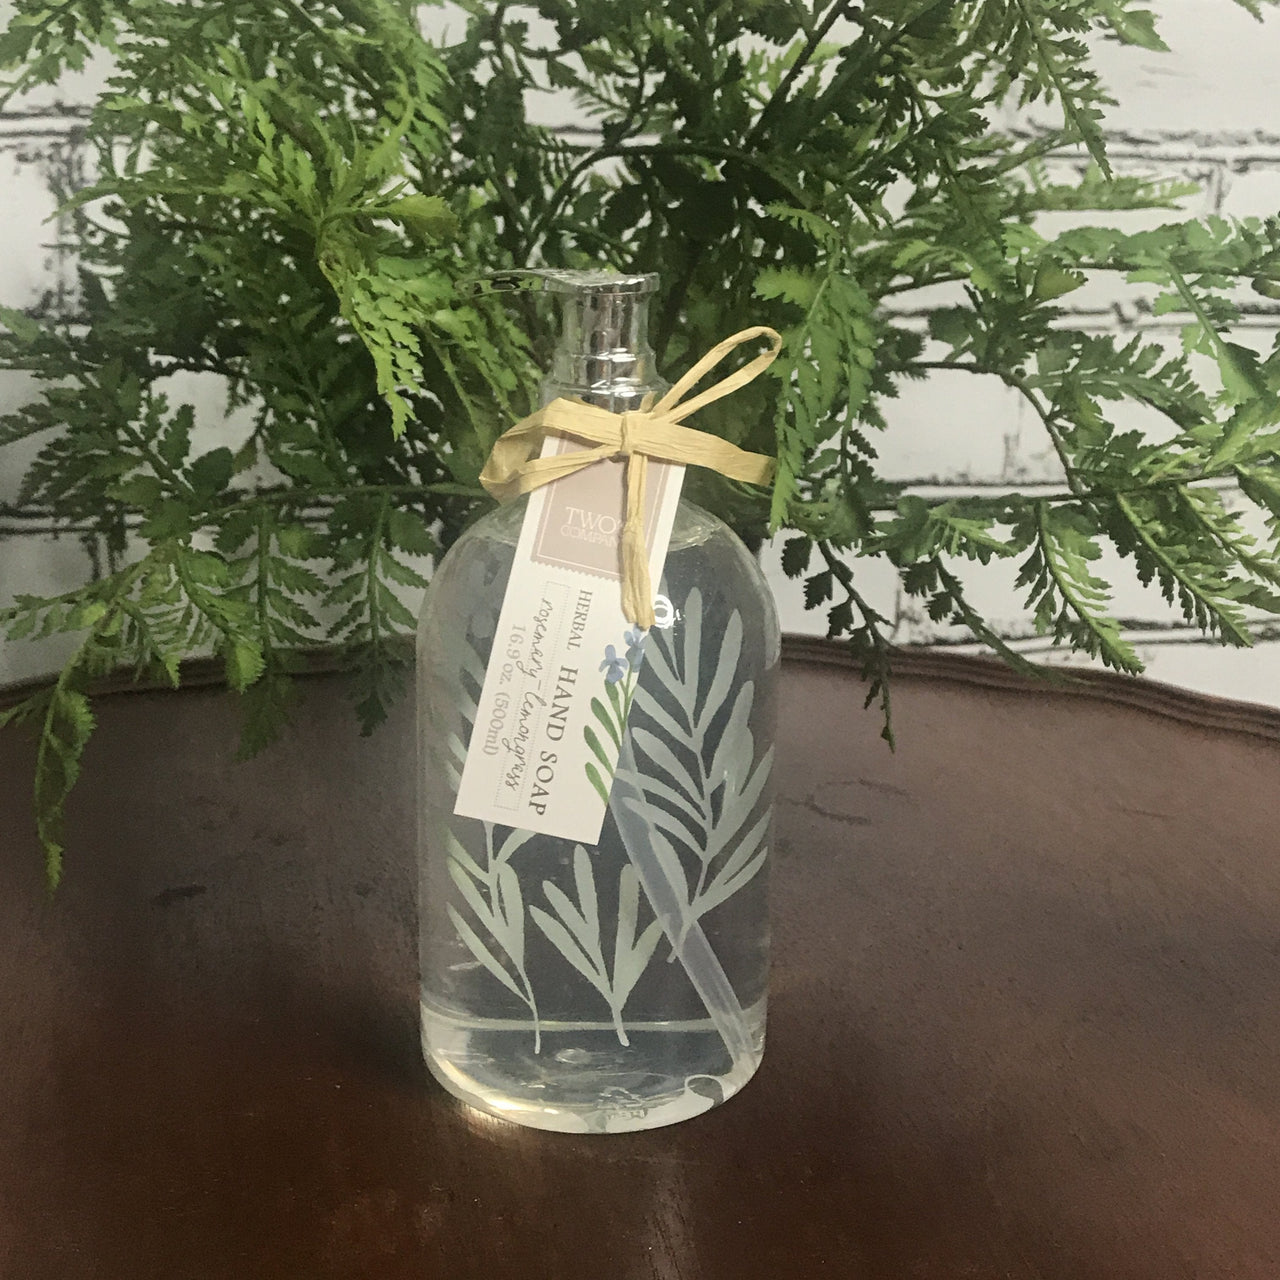 Herbal Infused Hand Soap | 16.9 oz Two's Company Soap rosemary-lemongrass